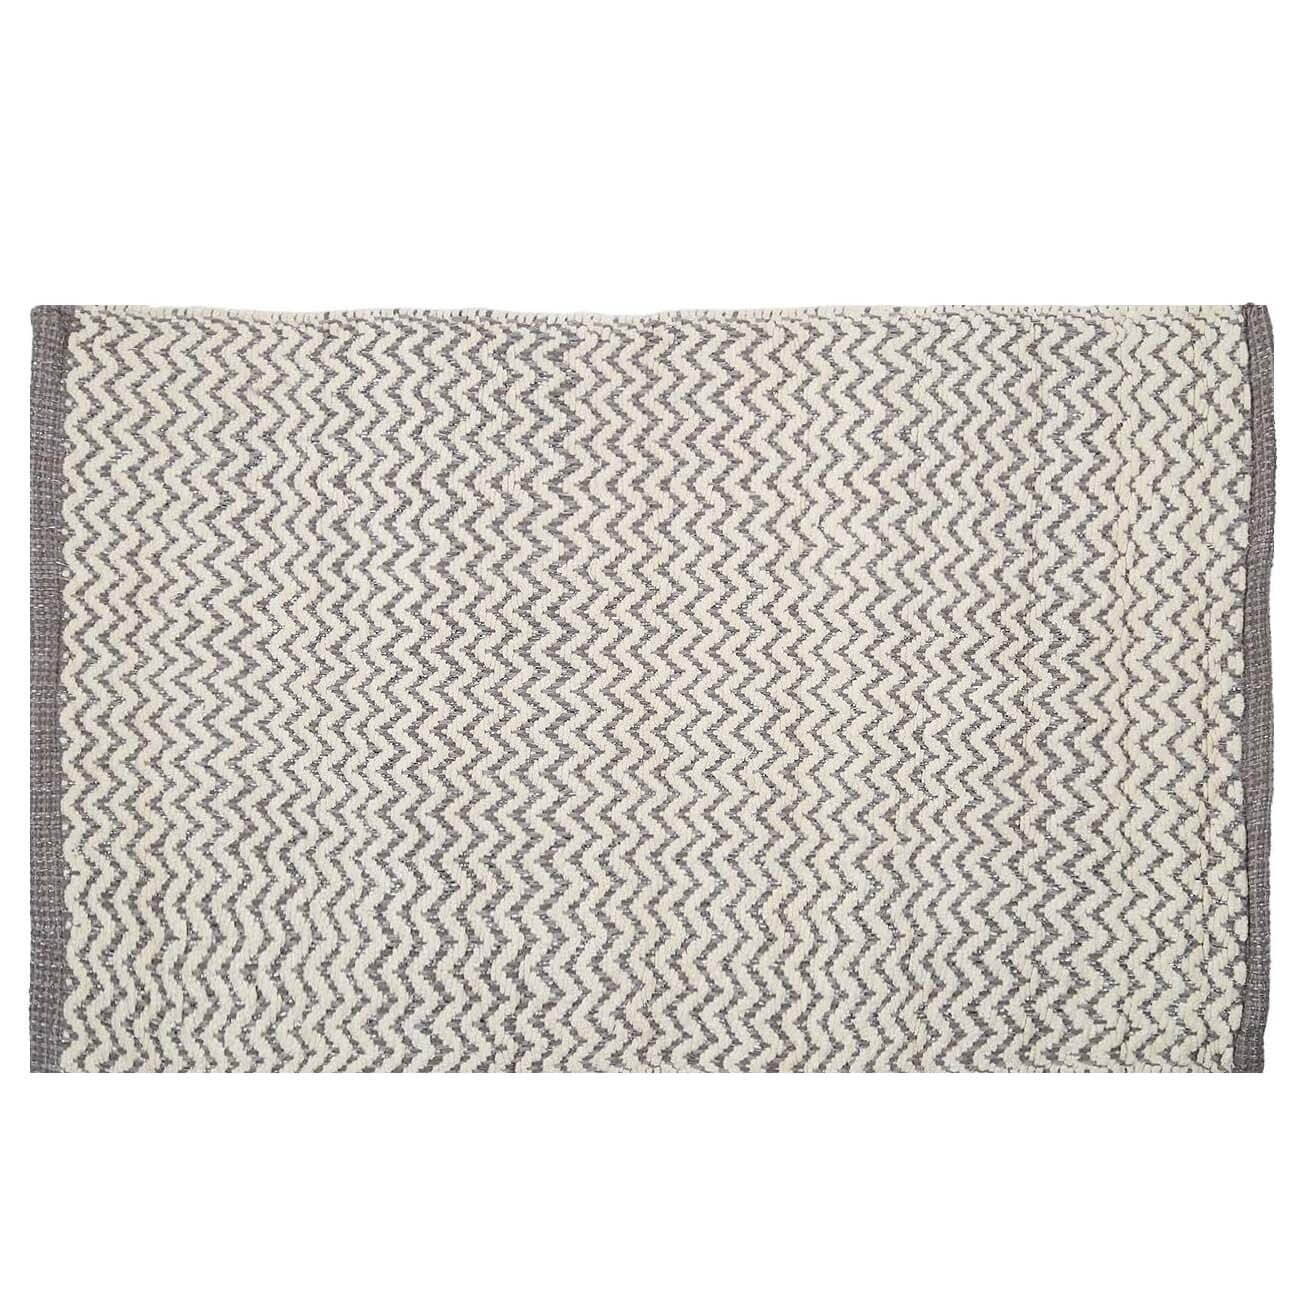 Mat, 50x80 cm, cotton, white and gray, Zigzags with lurex, Shiny threads изображение № 1